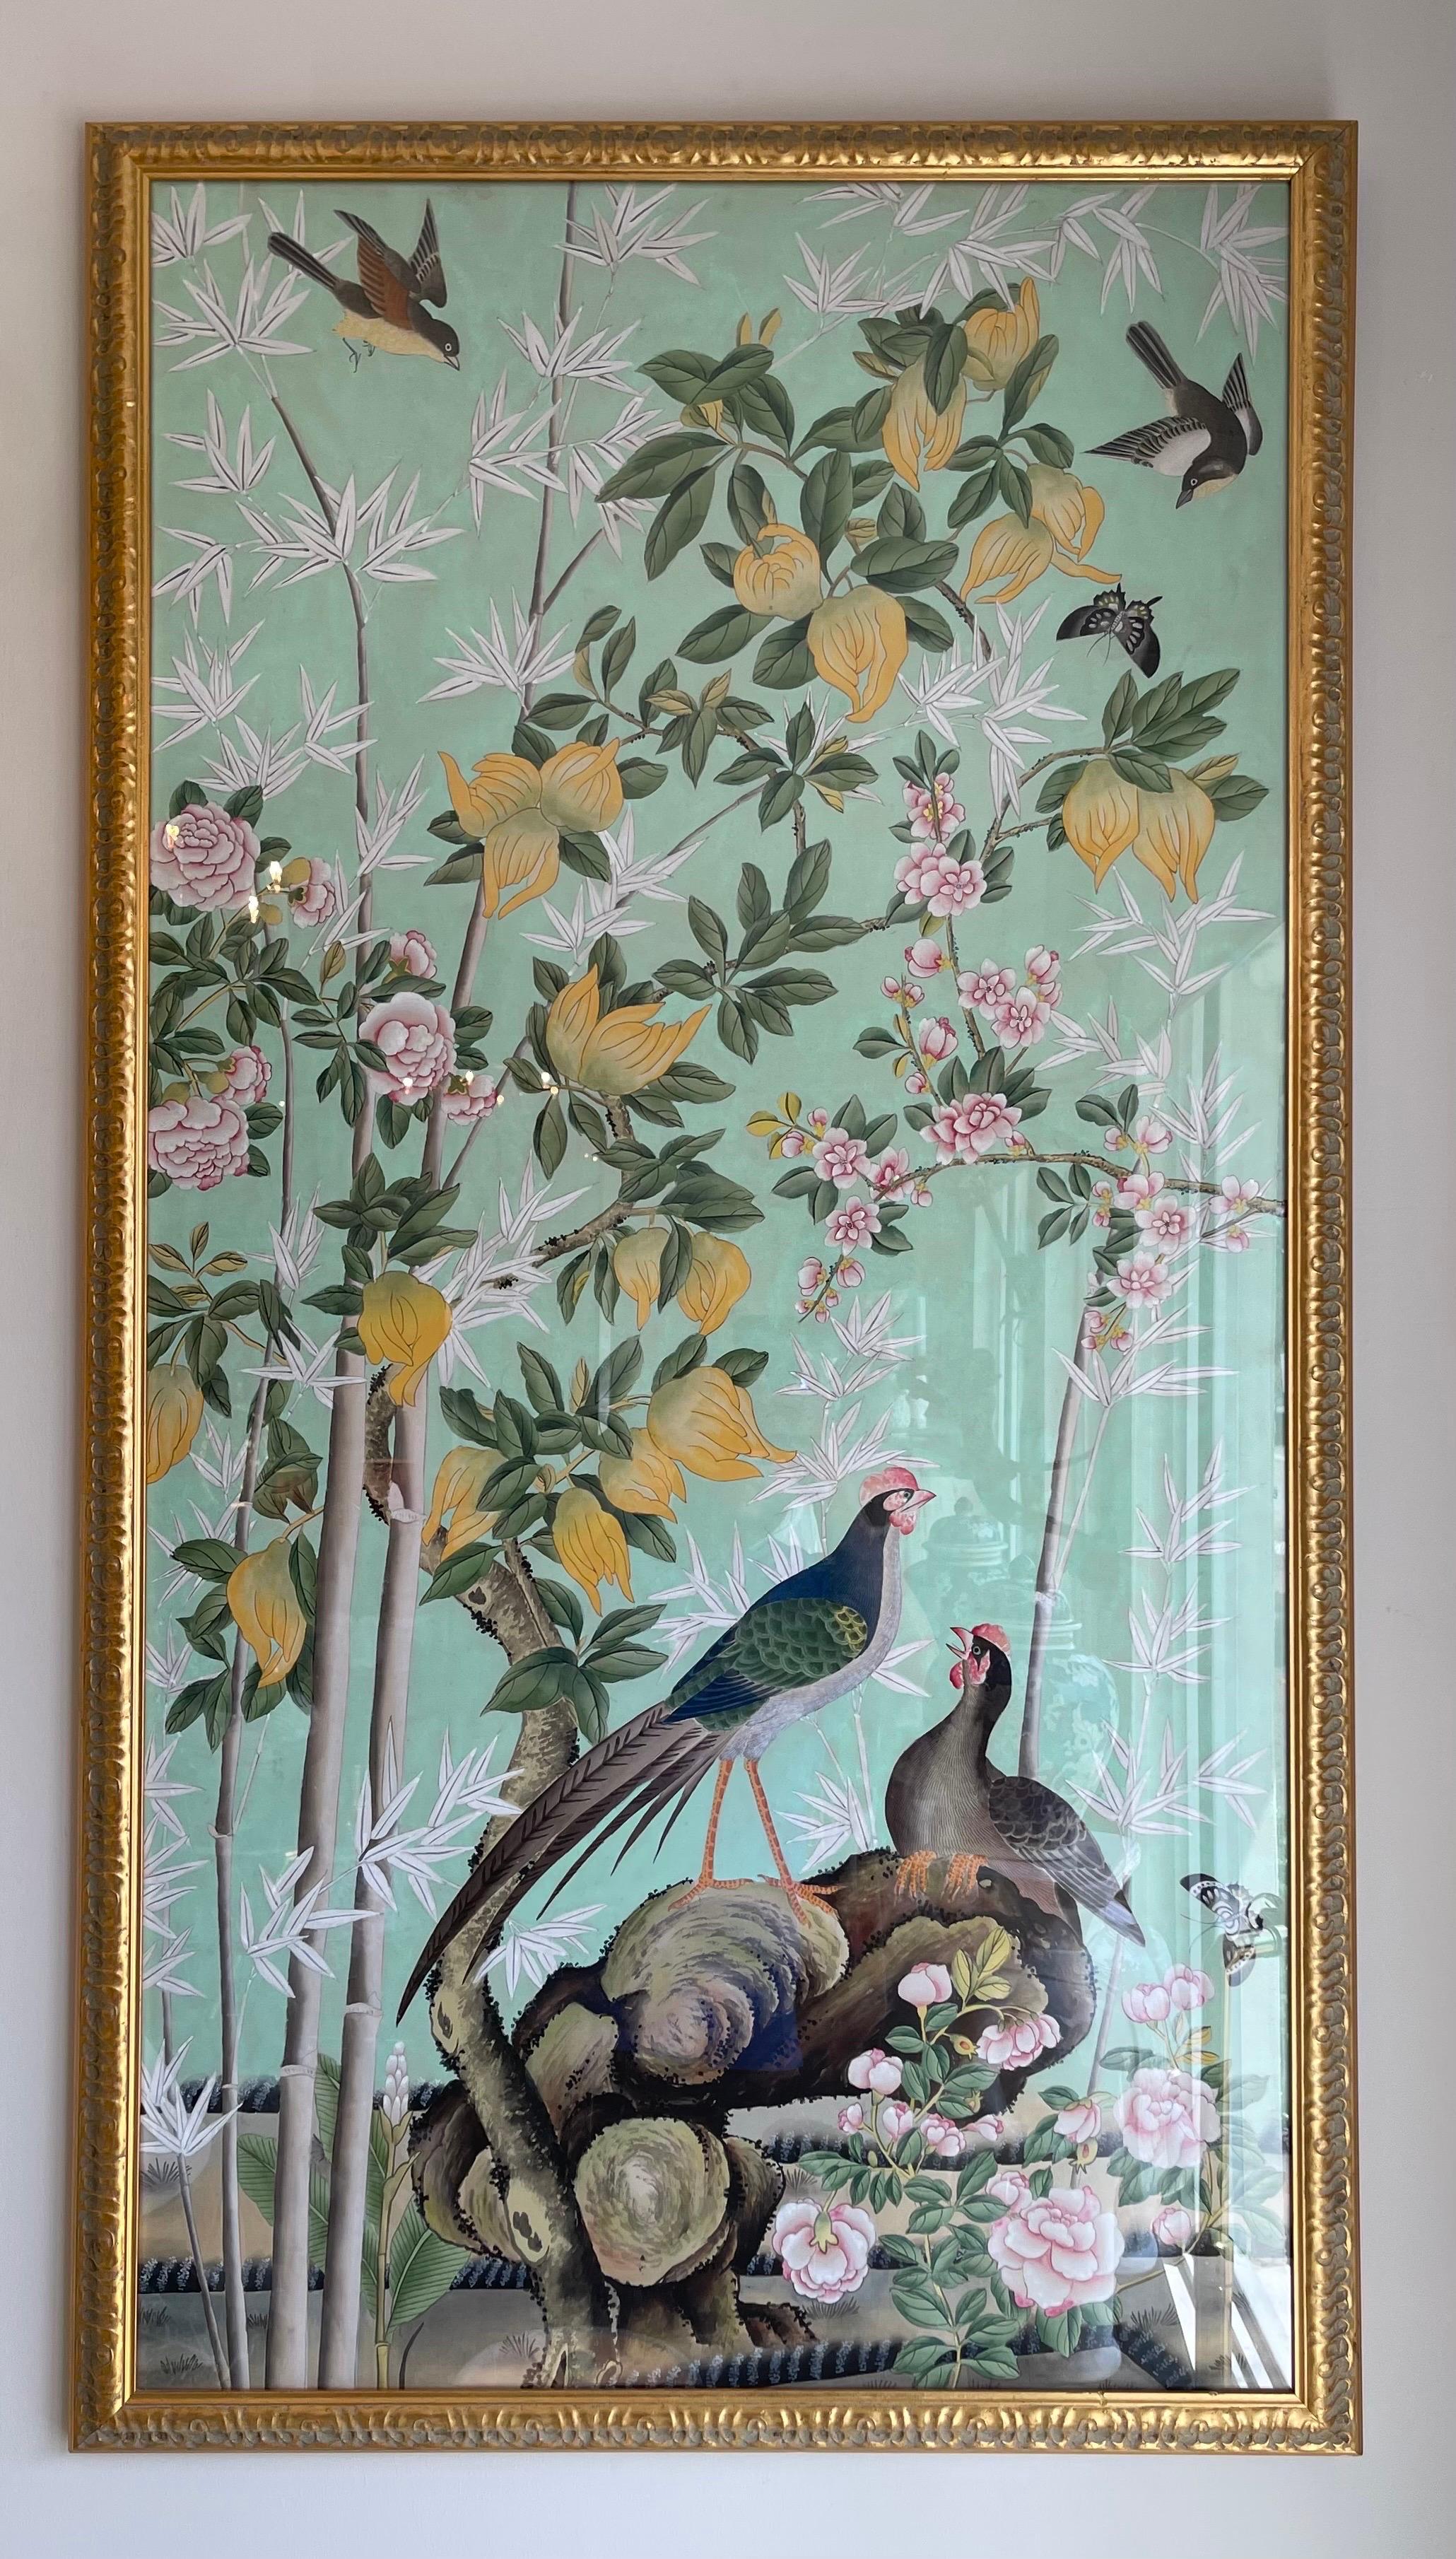 Wonderful pair of painted panels in the style of Gracie. Beautiful colorations with birds and flora.